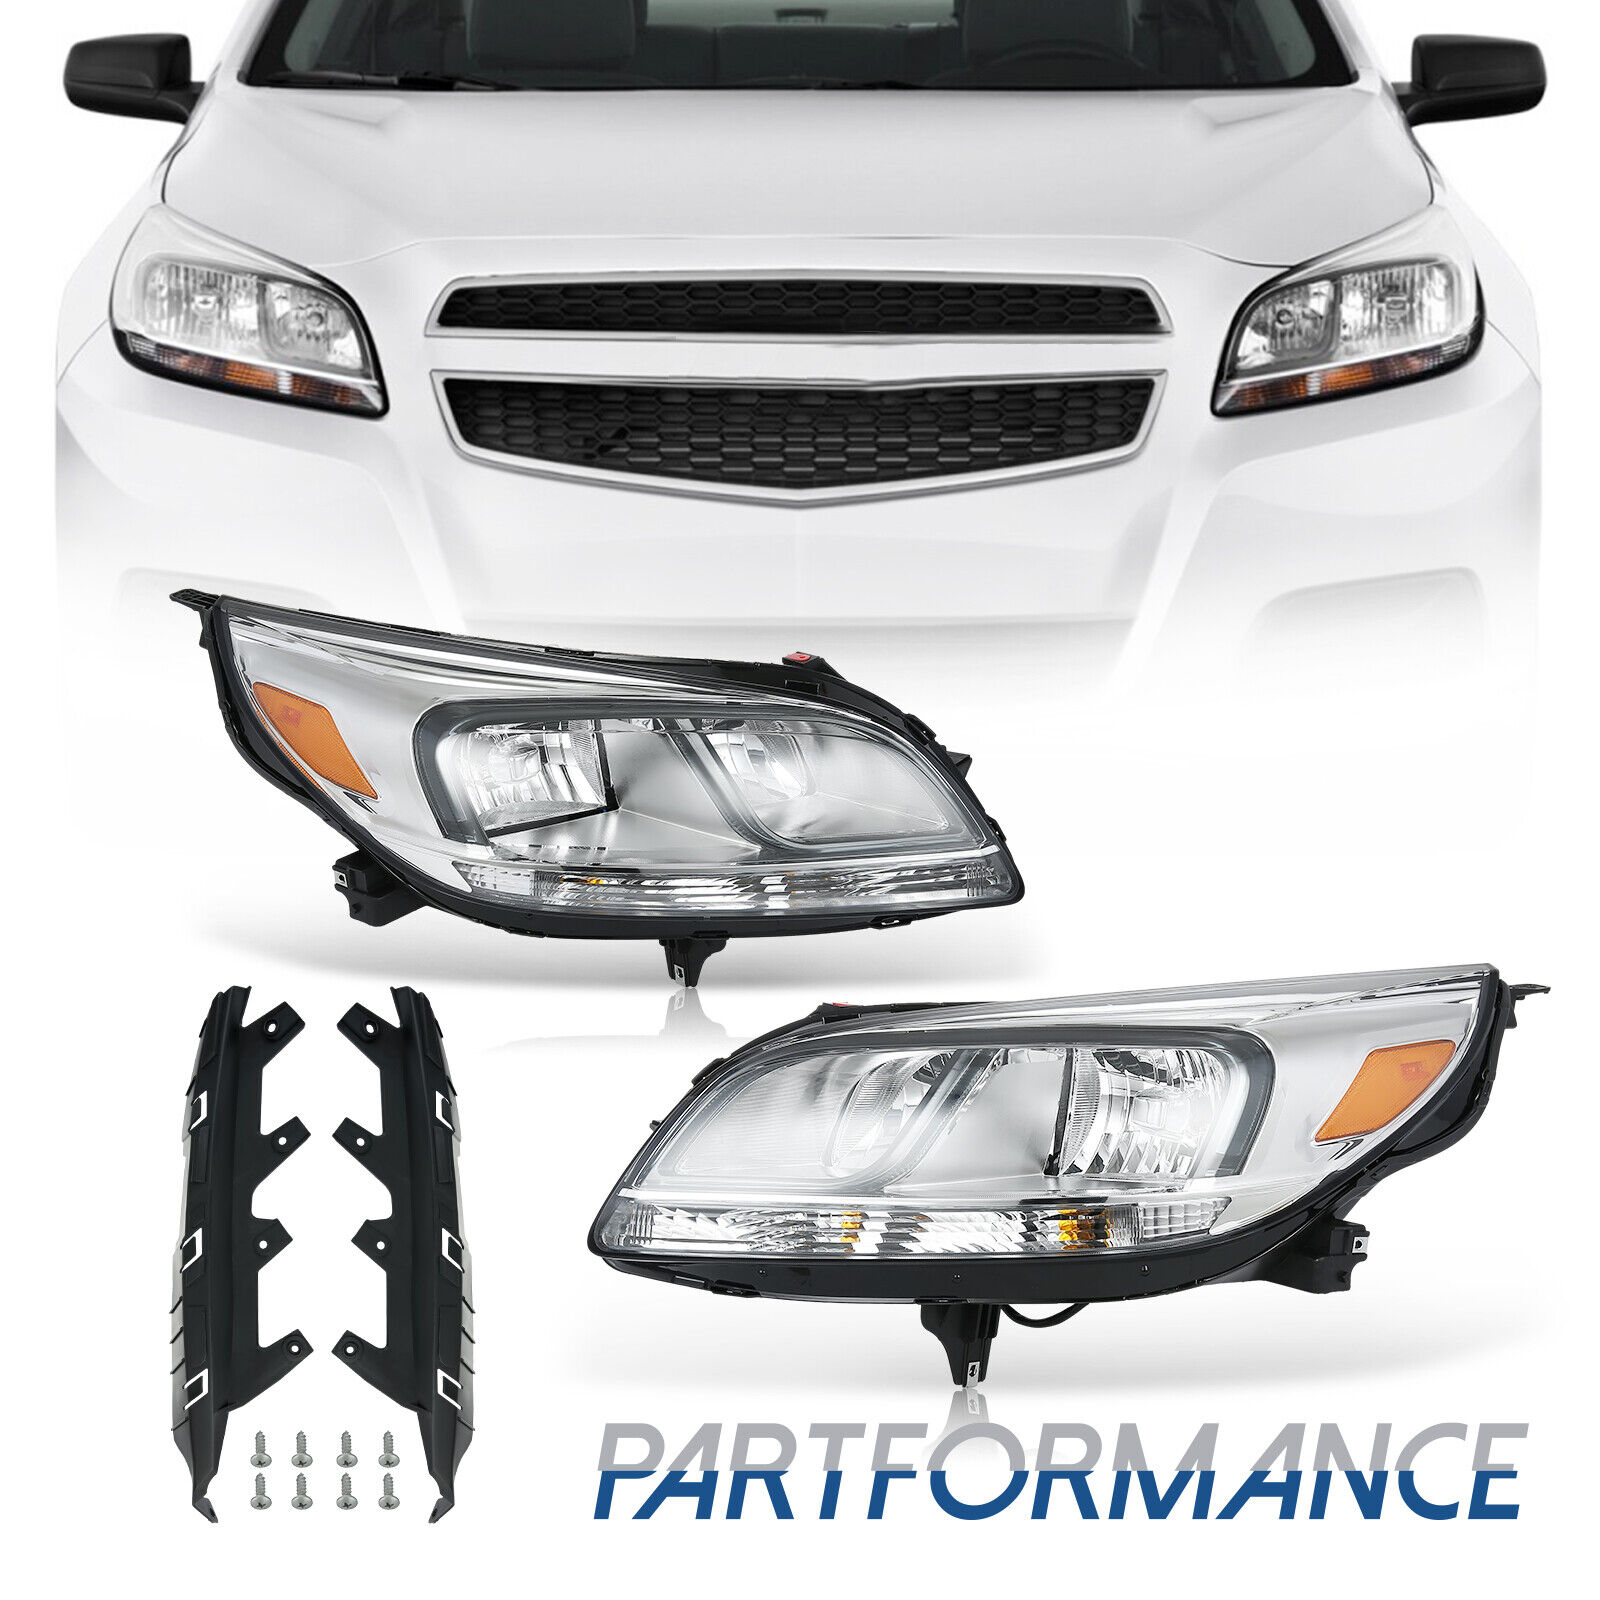 For 2013-15 Chevy Malibu LS 2016 Limited LS Halogen Headlight Pair Left & Right